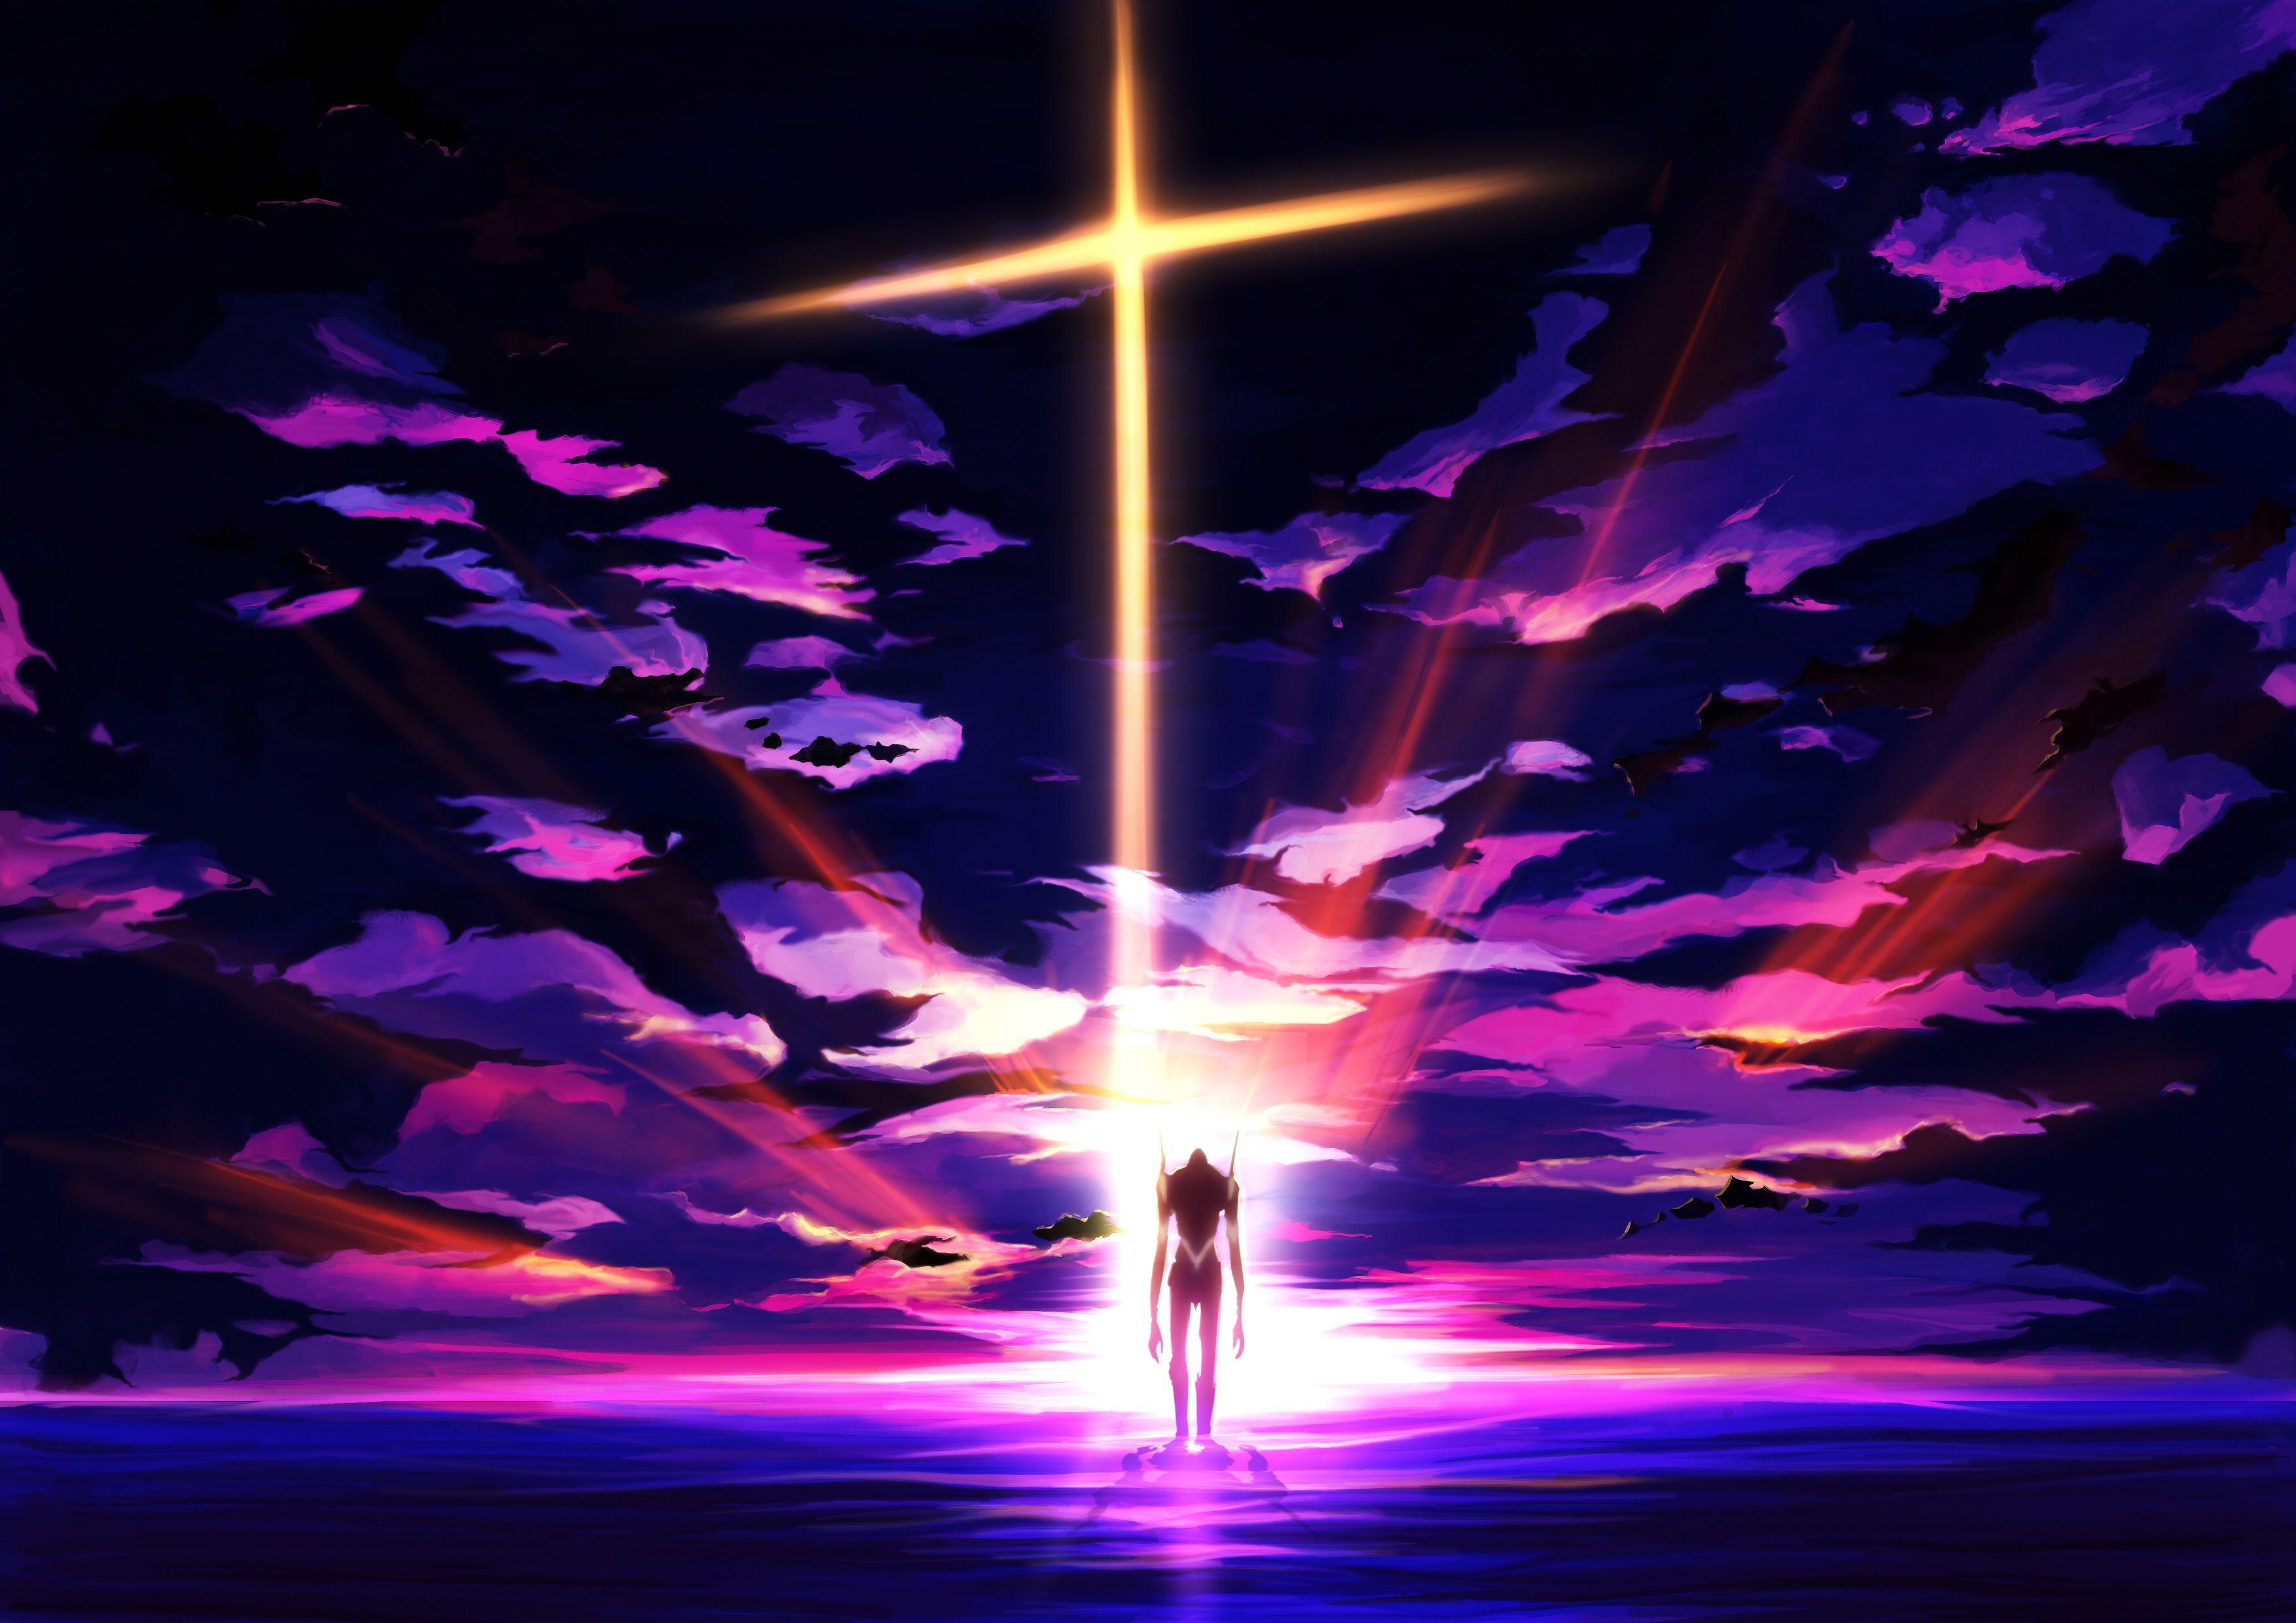 Evangelion Wallpapers Hd Evangelion Wallpapers For 4k 1080p Hd And 720p Hd Resolutions And